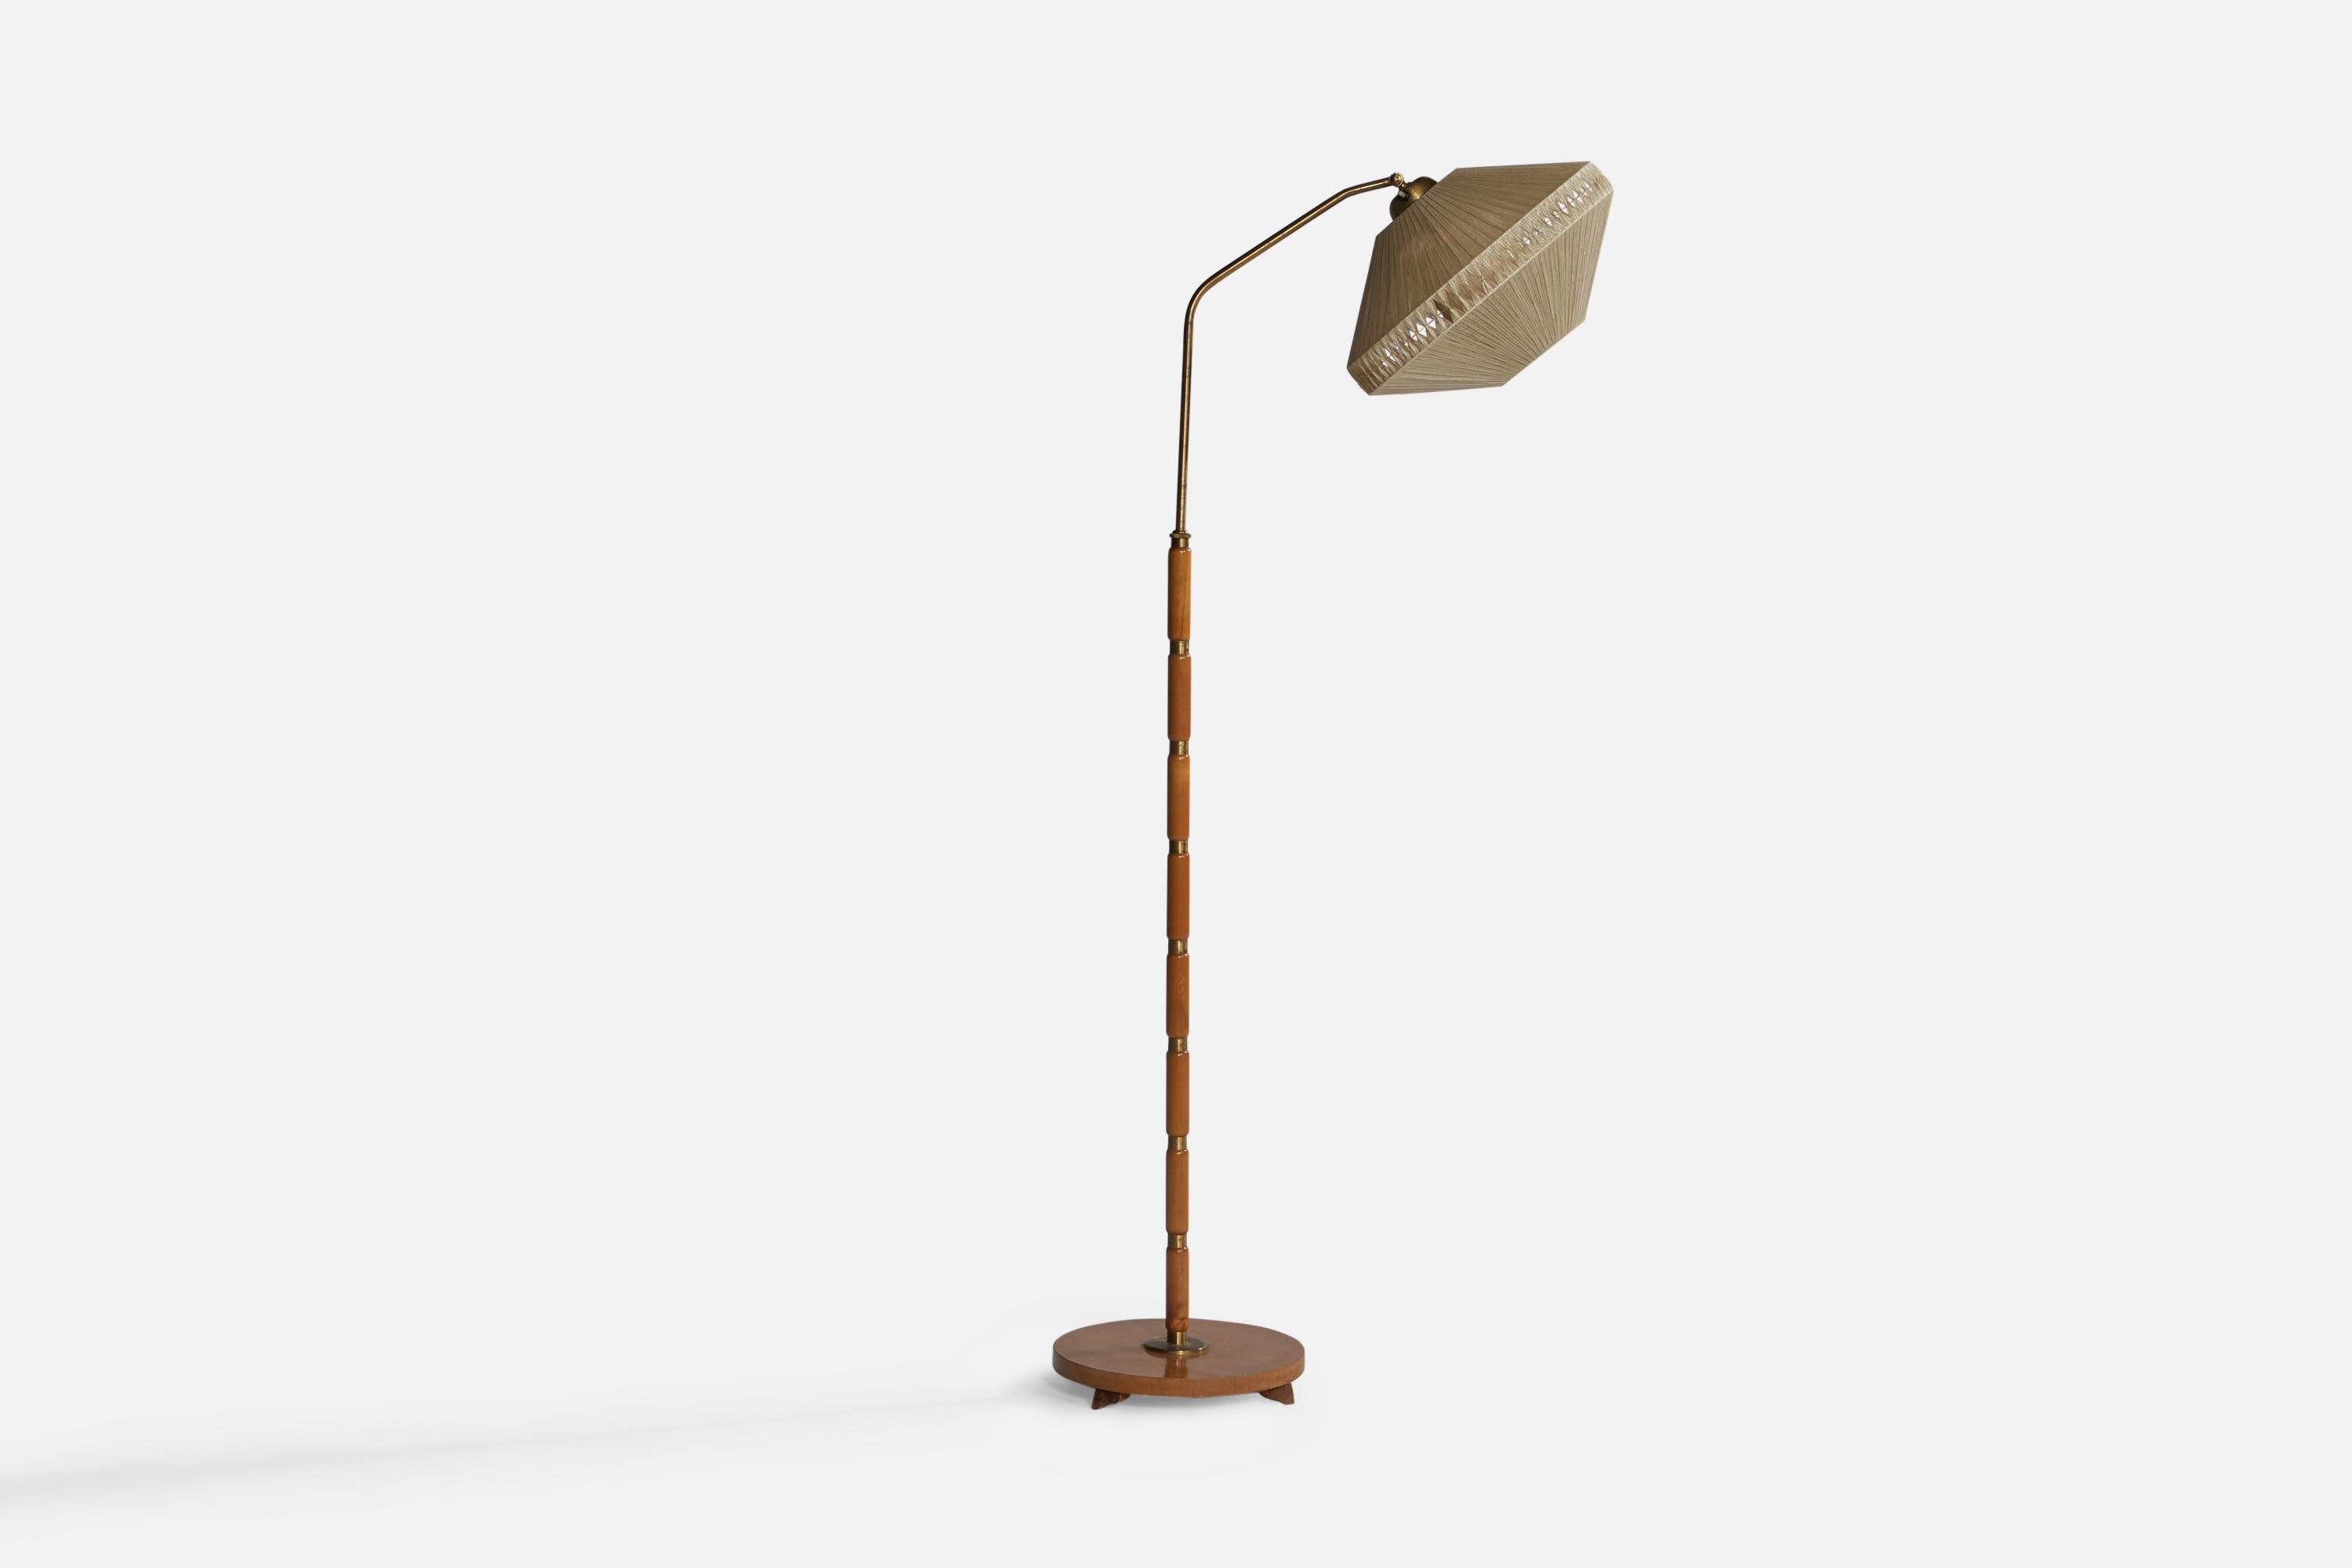 An adjustable brass, wood and string fabric floor lamp designed and produced in Sweden, 1940s.

Overall Dimensions (inches): 63.2” H x 16 ” W x 28” D. Stated dimensions include shade.
Dimensions vary based on position of light.
Bulb Specifications: